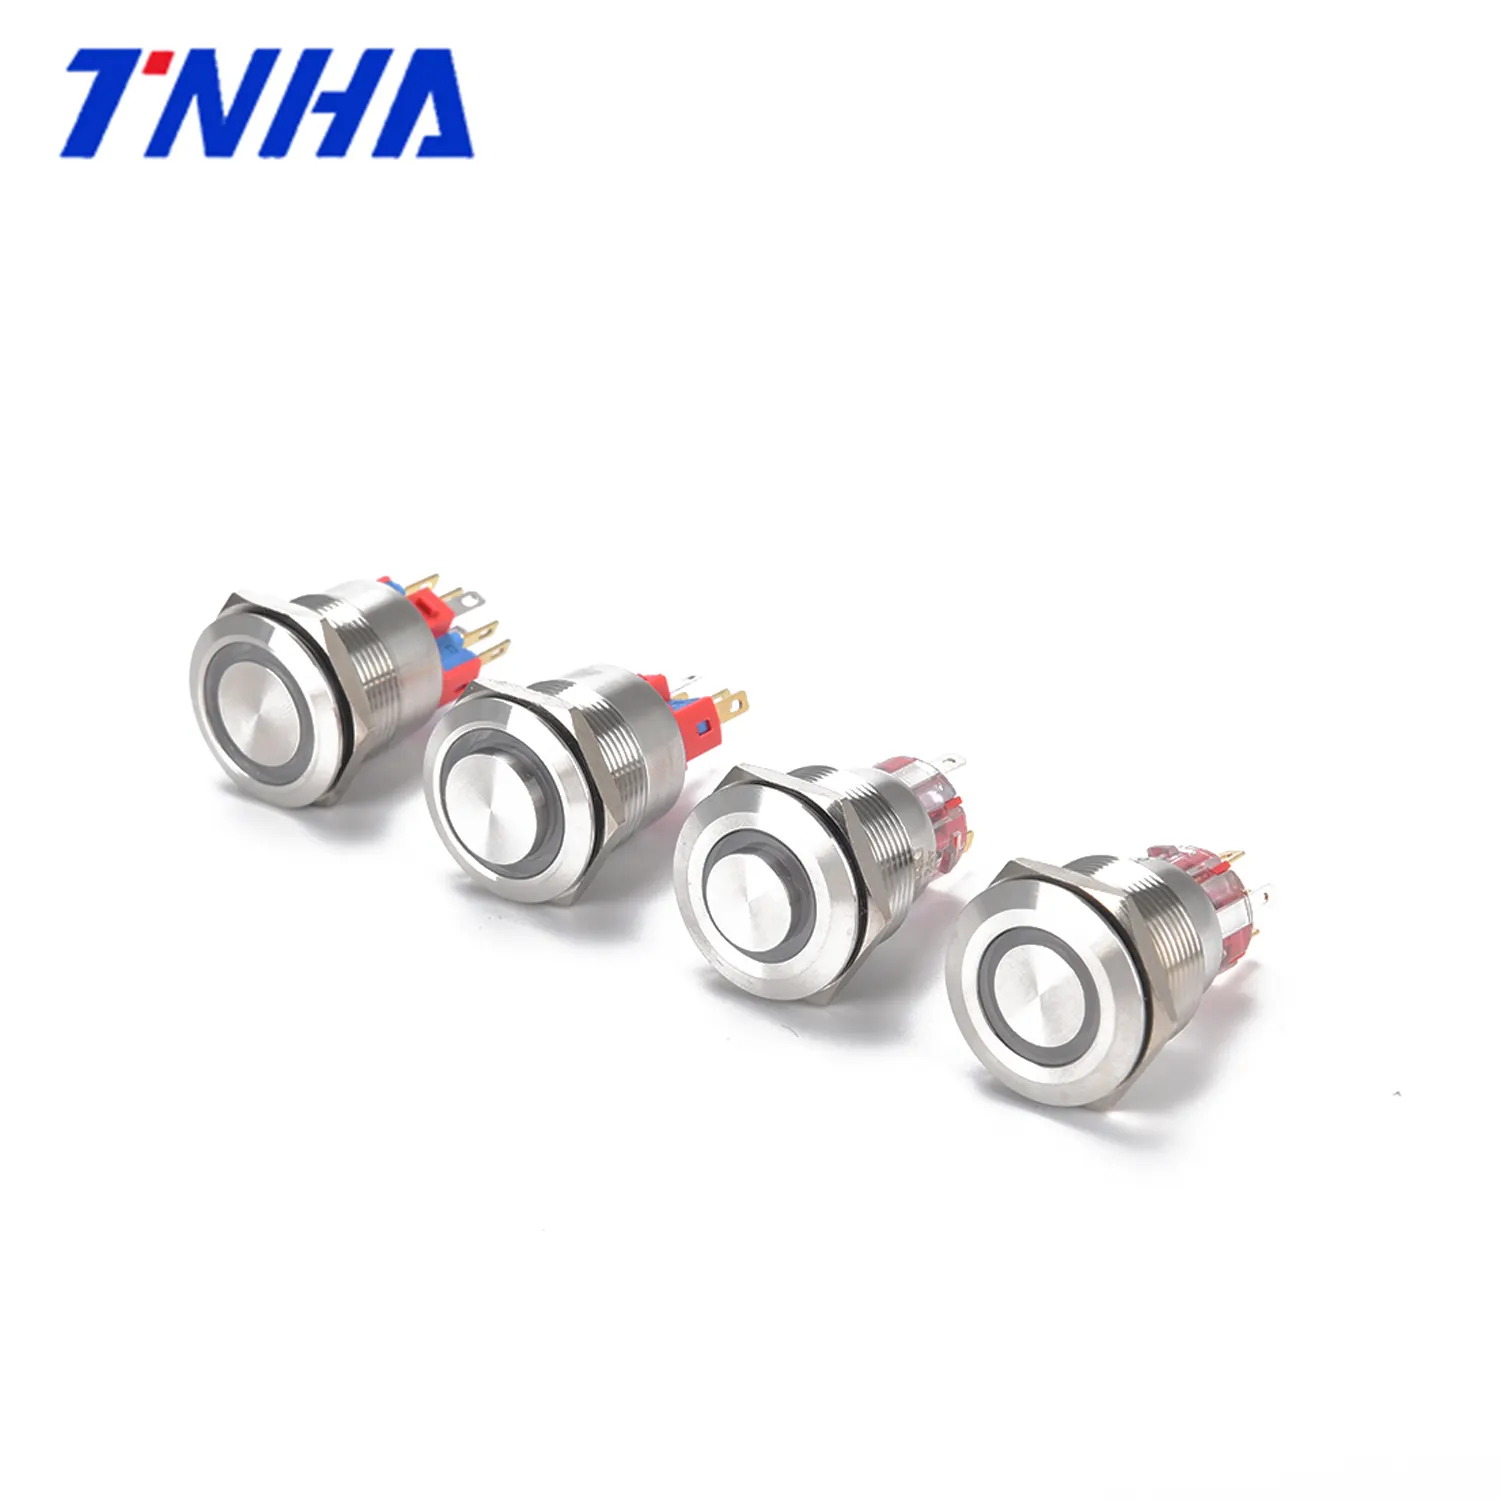 TNHA IP65 22mm AC 250V LED light Metal push button reset stainless steel pushbutton Customizable plastic on-off switch